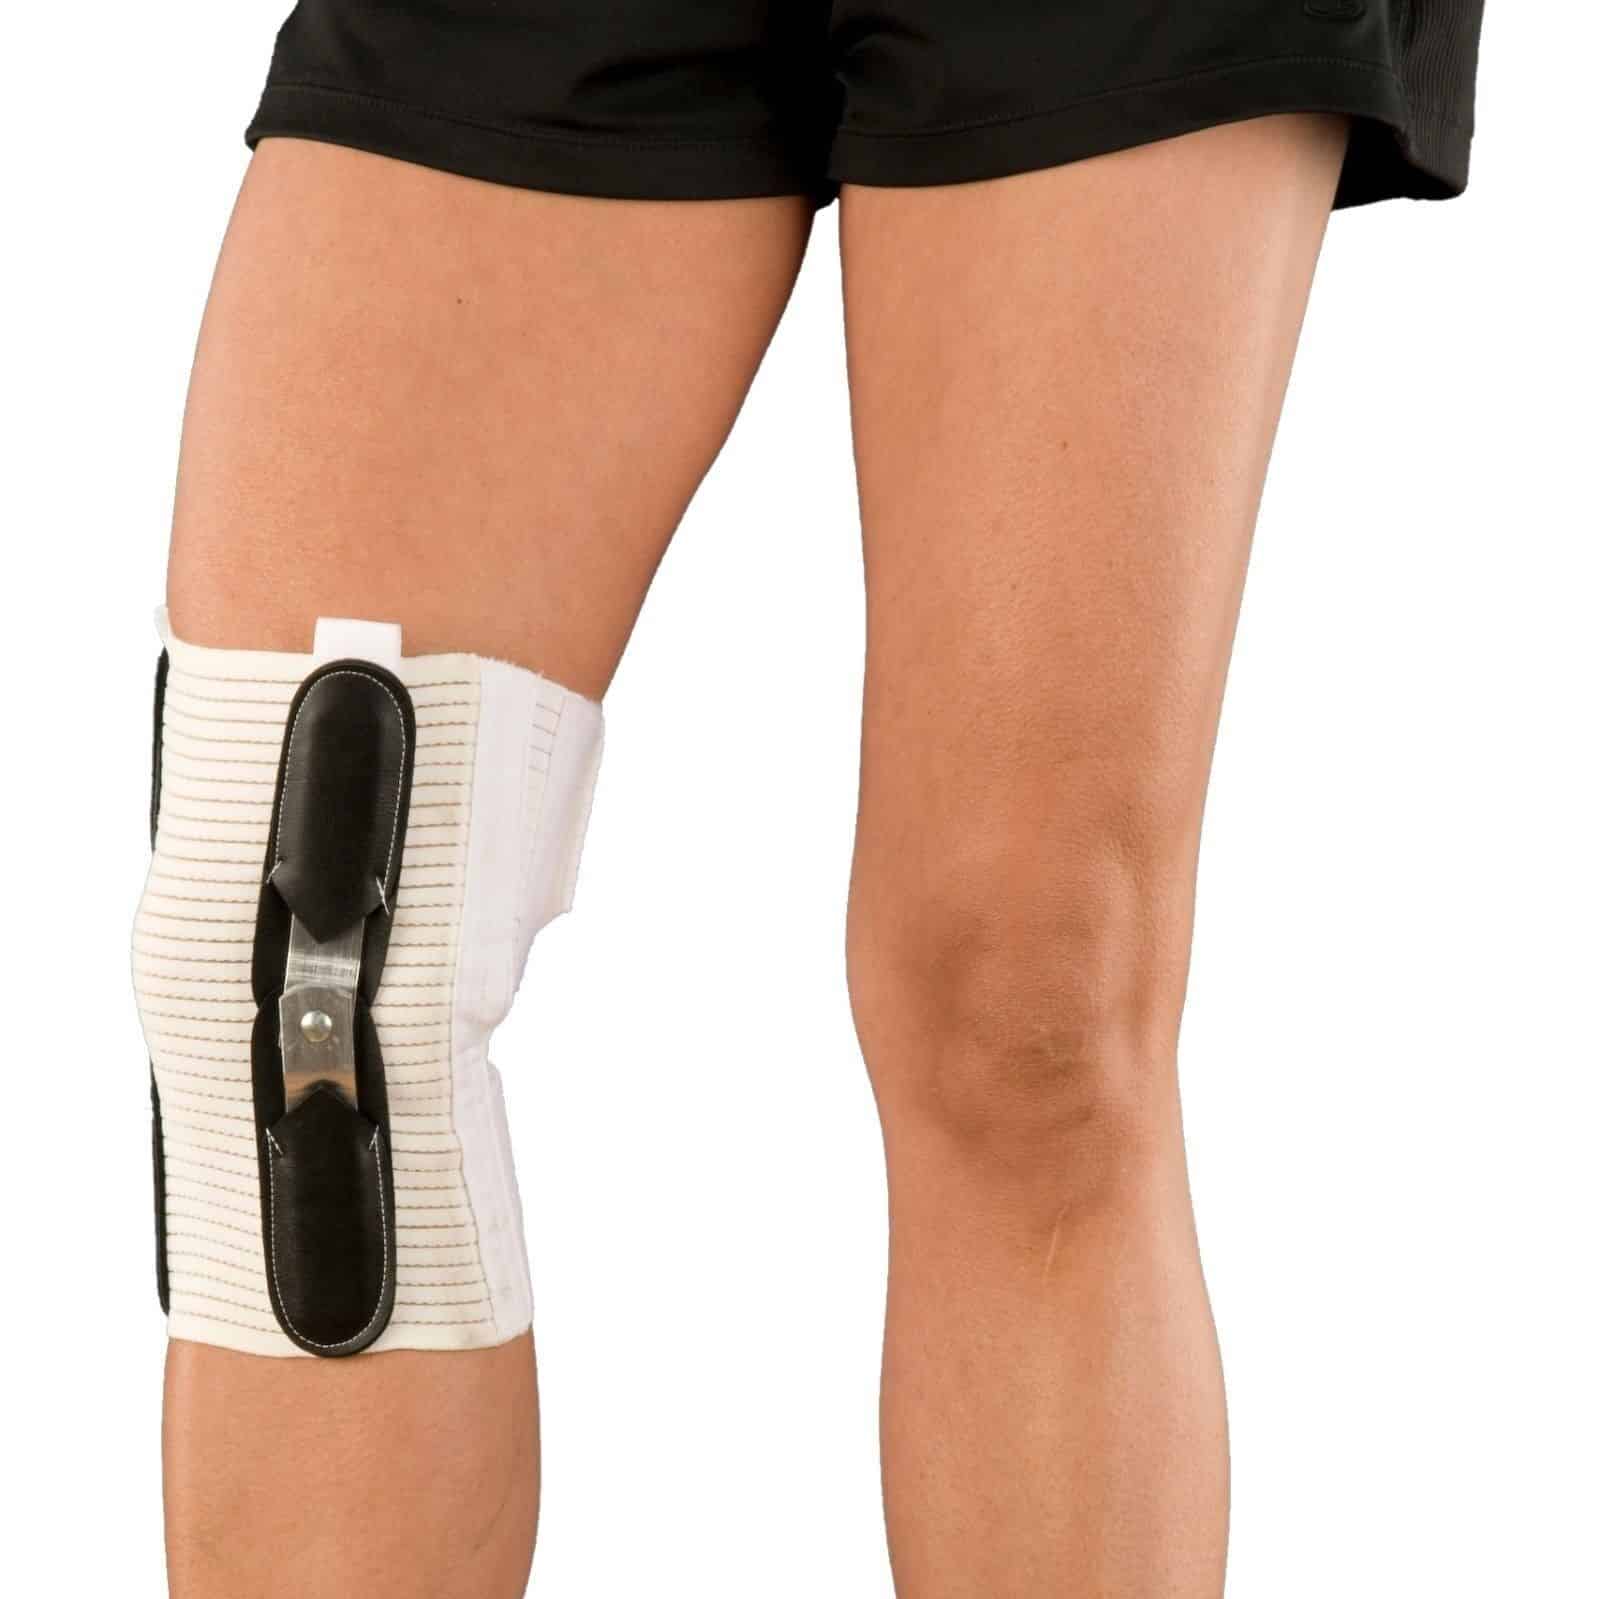 AT Surgical Hinged Knee Brace with Spirals for Osteoarthritis and ...